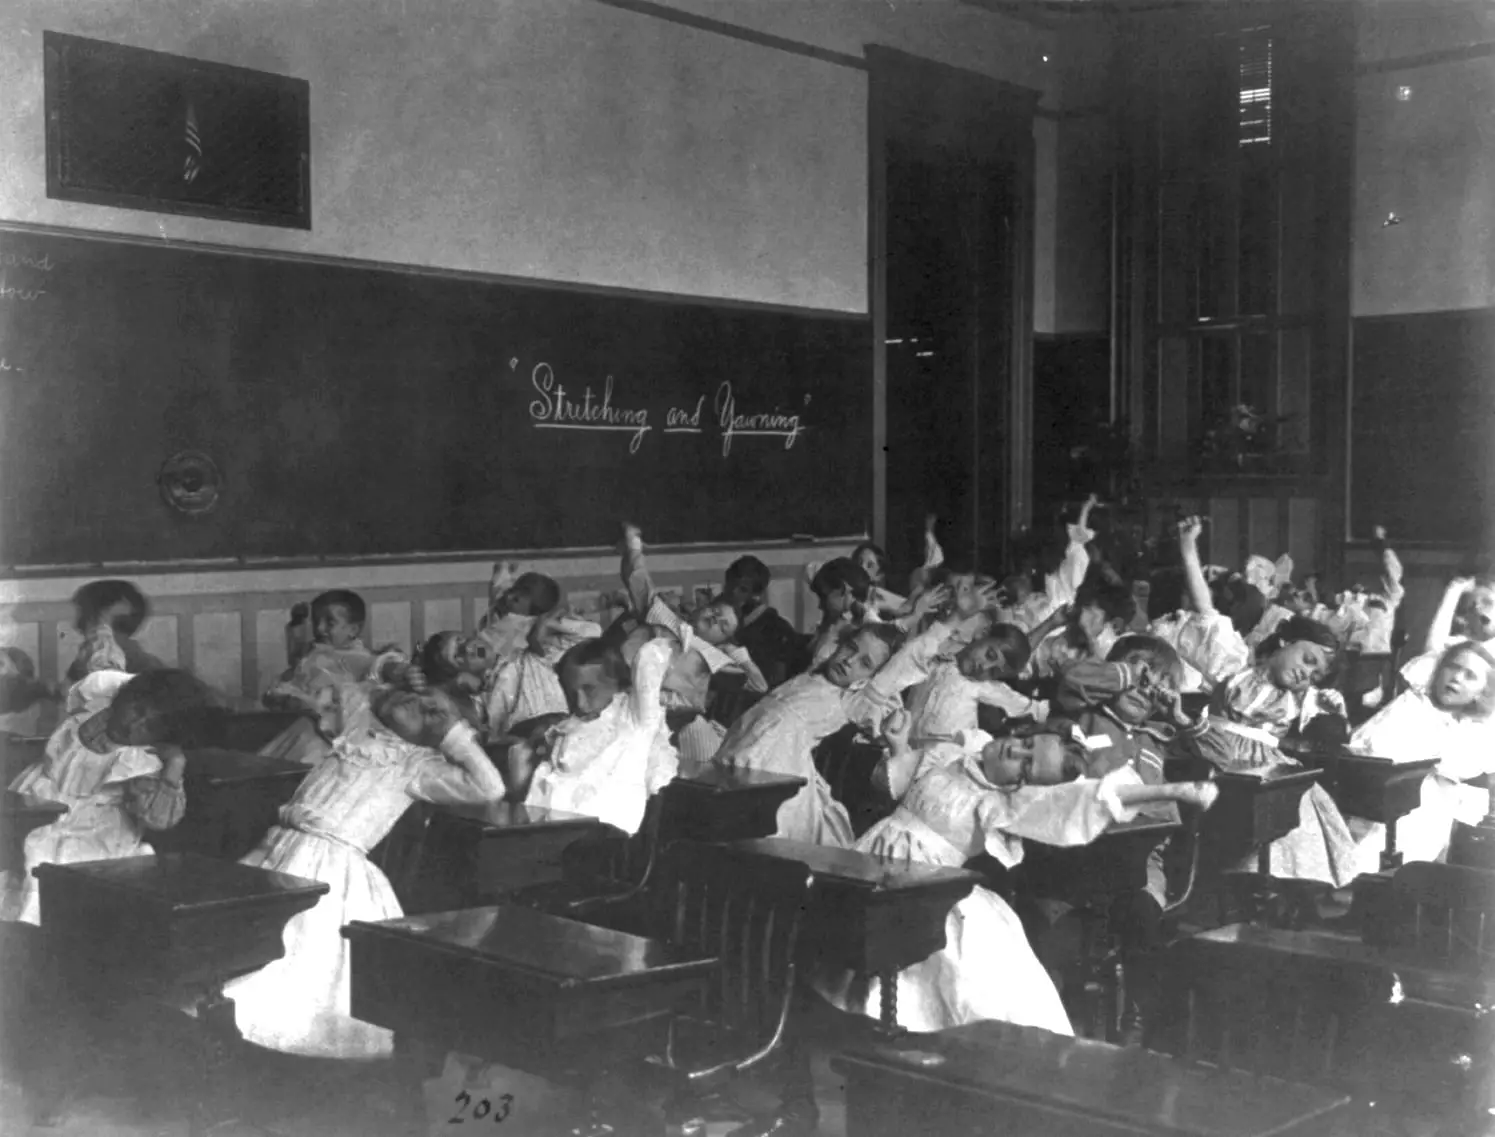 stretching and yawning in the classroom circa 1899